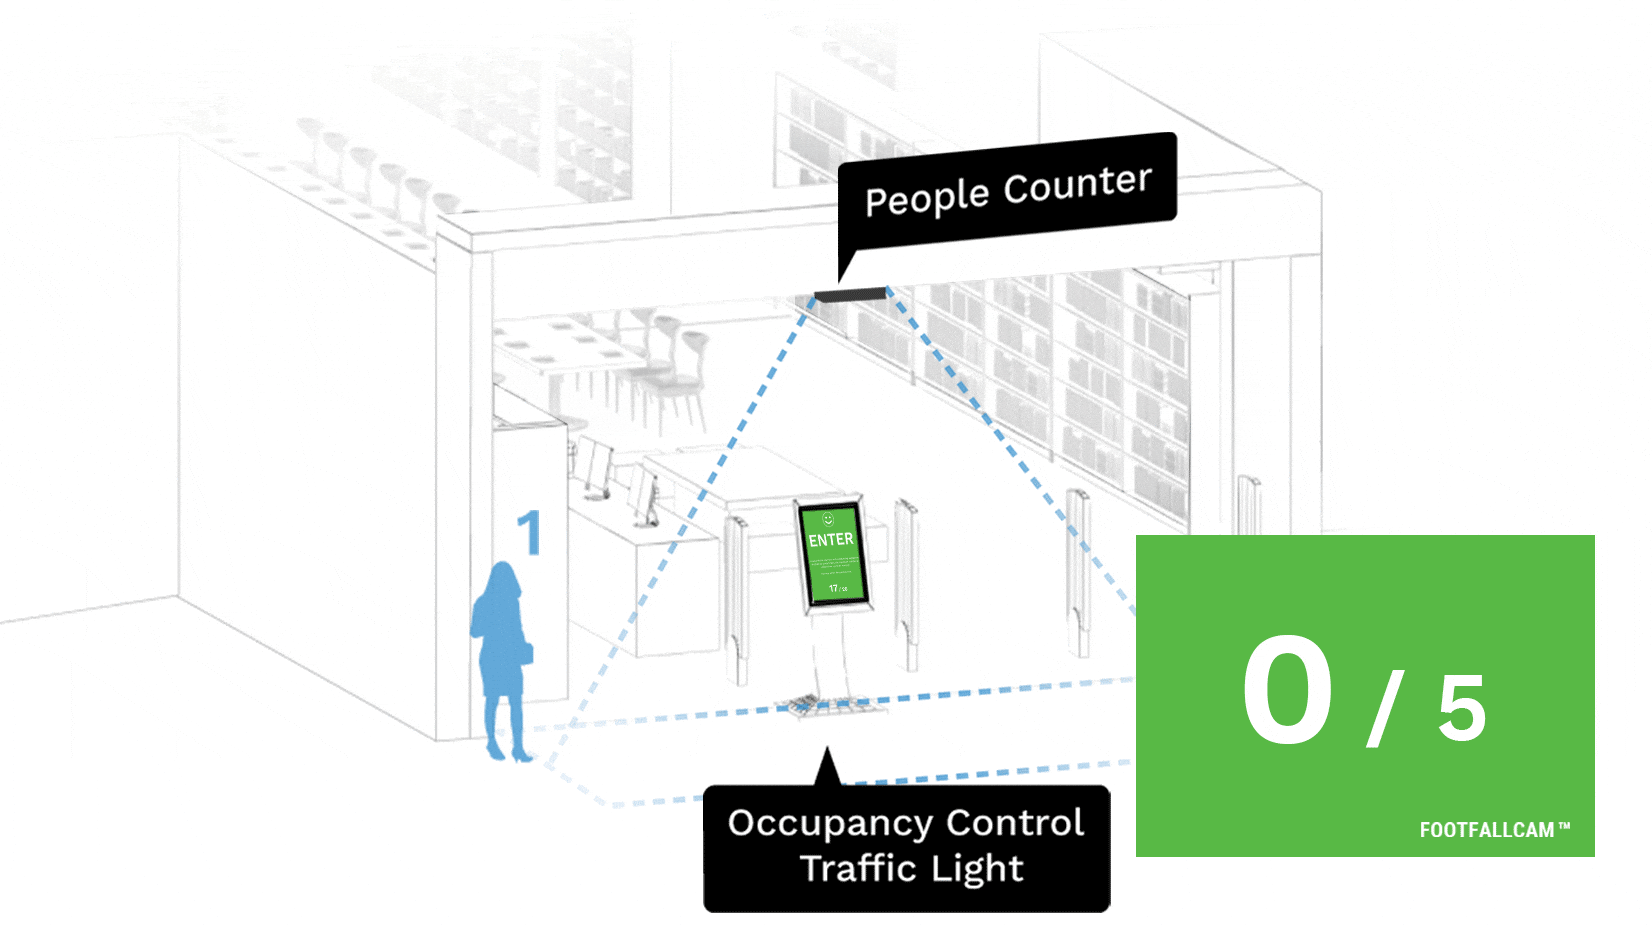 FootfallCam People Counting System - Real-time Occupancy Dashboard Display